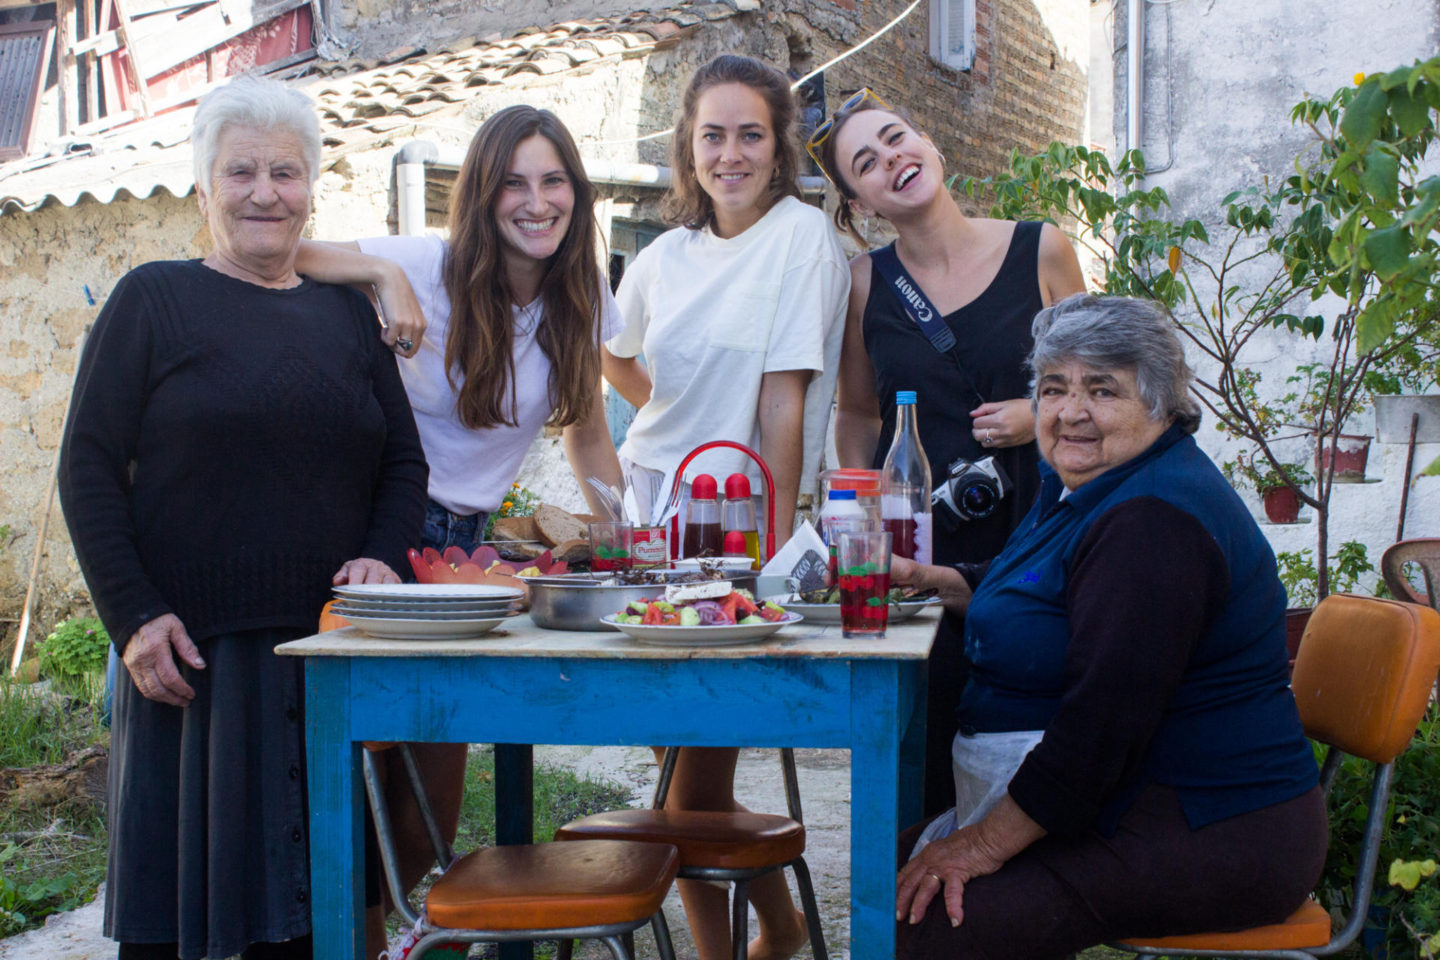 THESE GRANNIES SHOW US EVERYTHING WE NEED TO KNOW ABOUT HEALTHY EATING